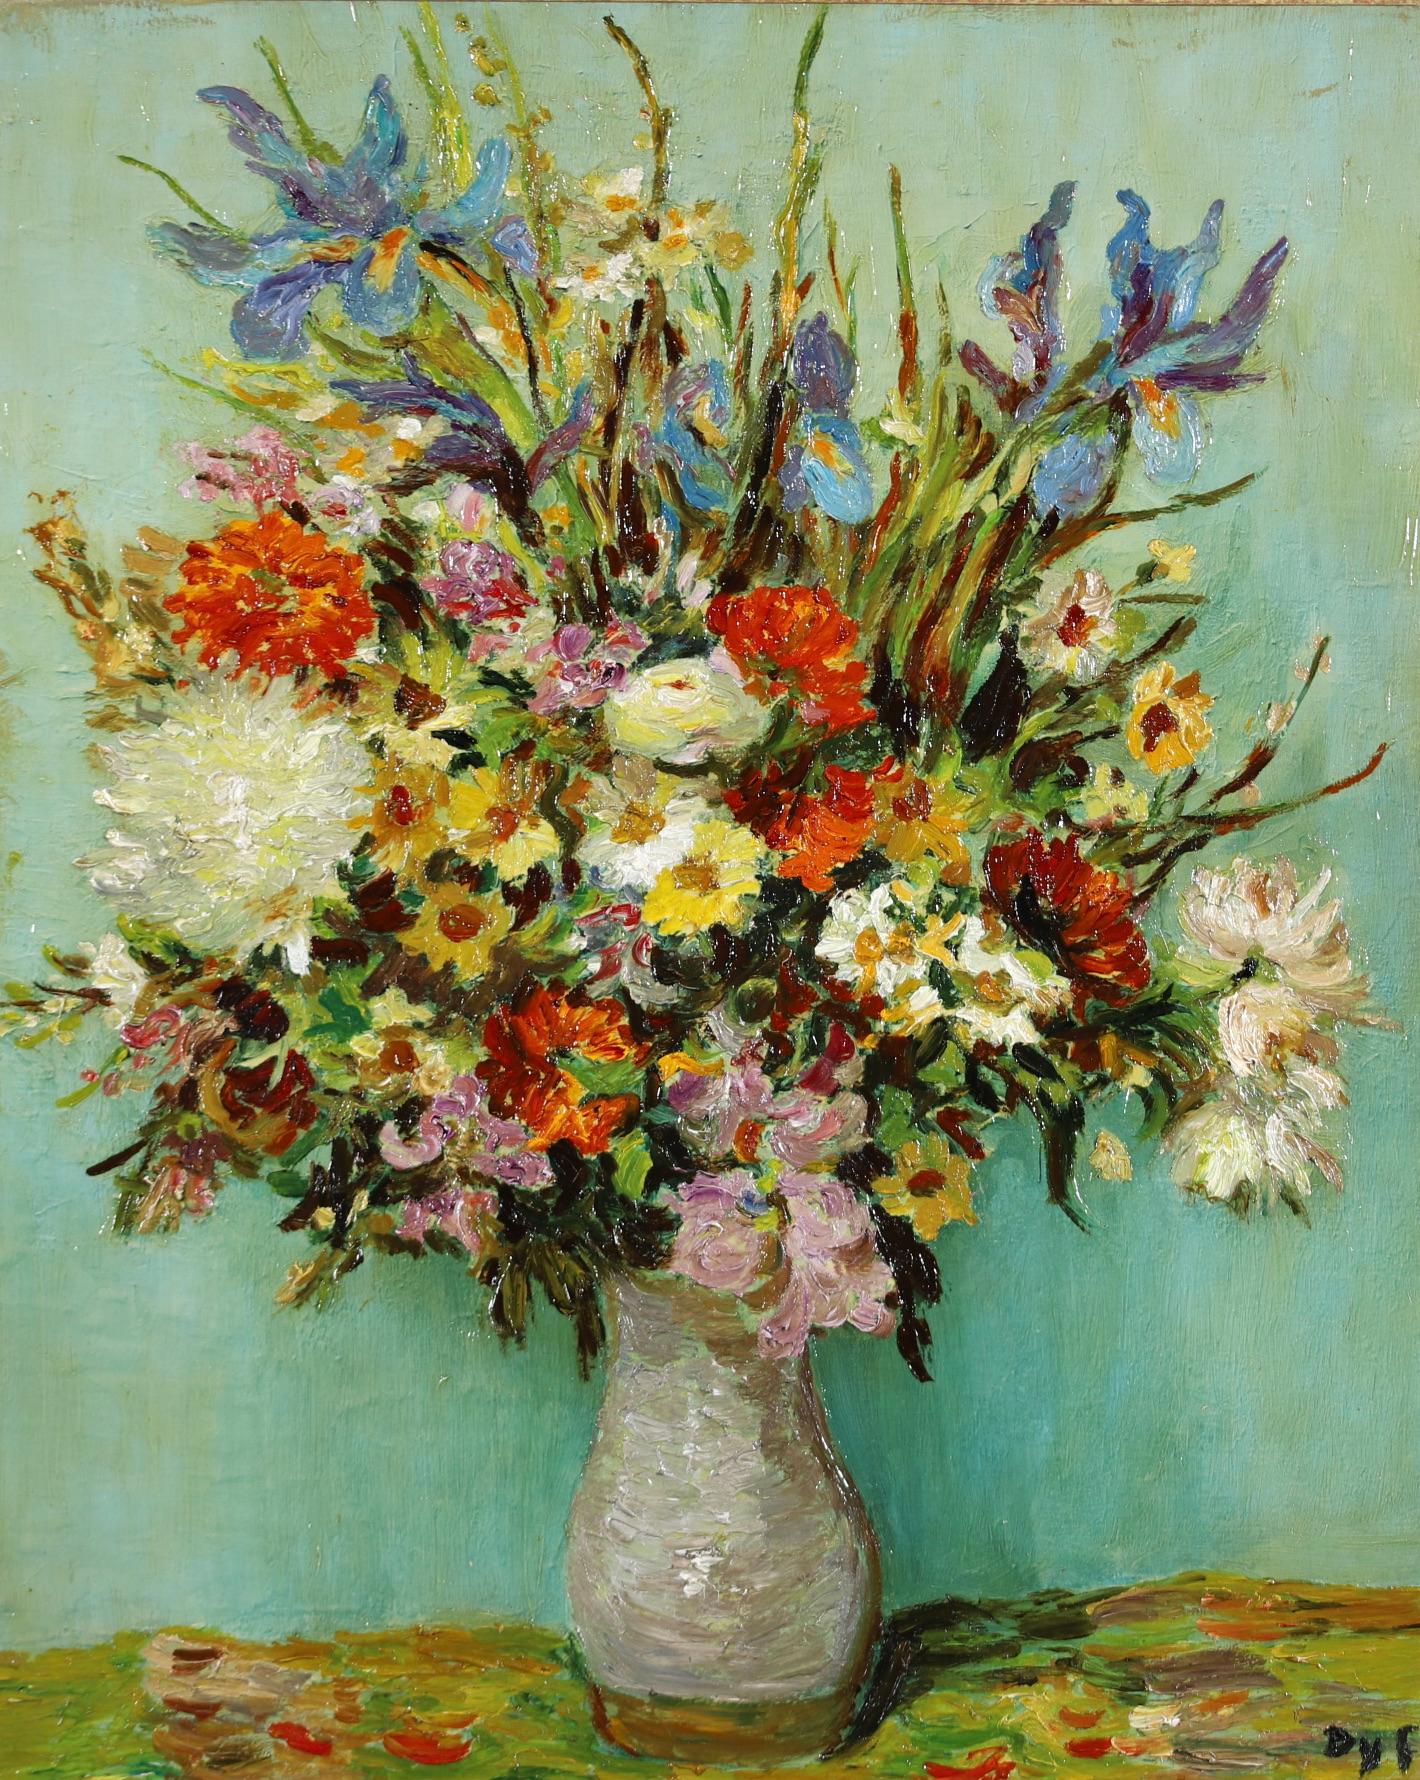 Signed post impressionist still life oil on canvas circa 1950 by sought after French impressionist painter Marcel Dyf. The work depicts a ceramic vase filled with colour flowers set against a turquoise background. A wonderful piece in the artist's